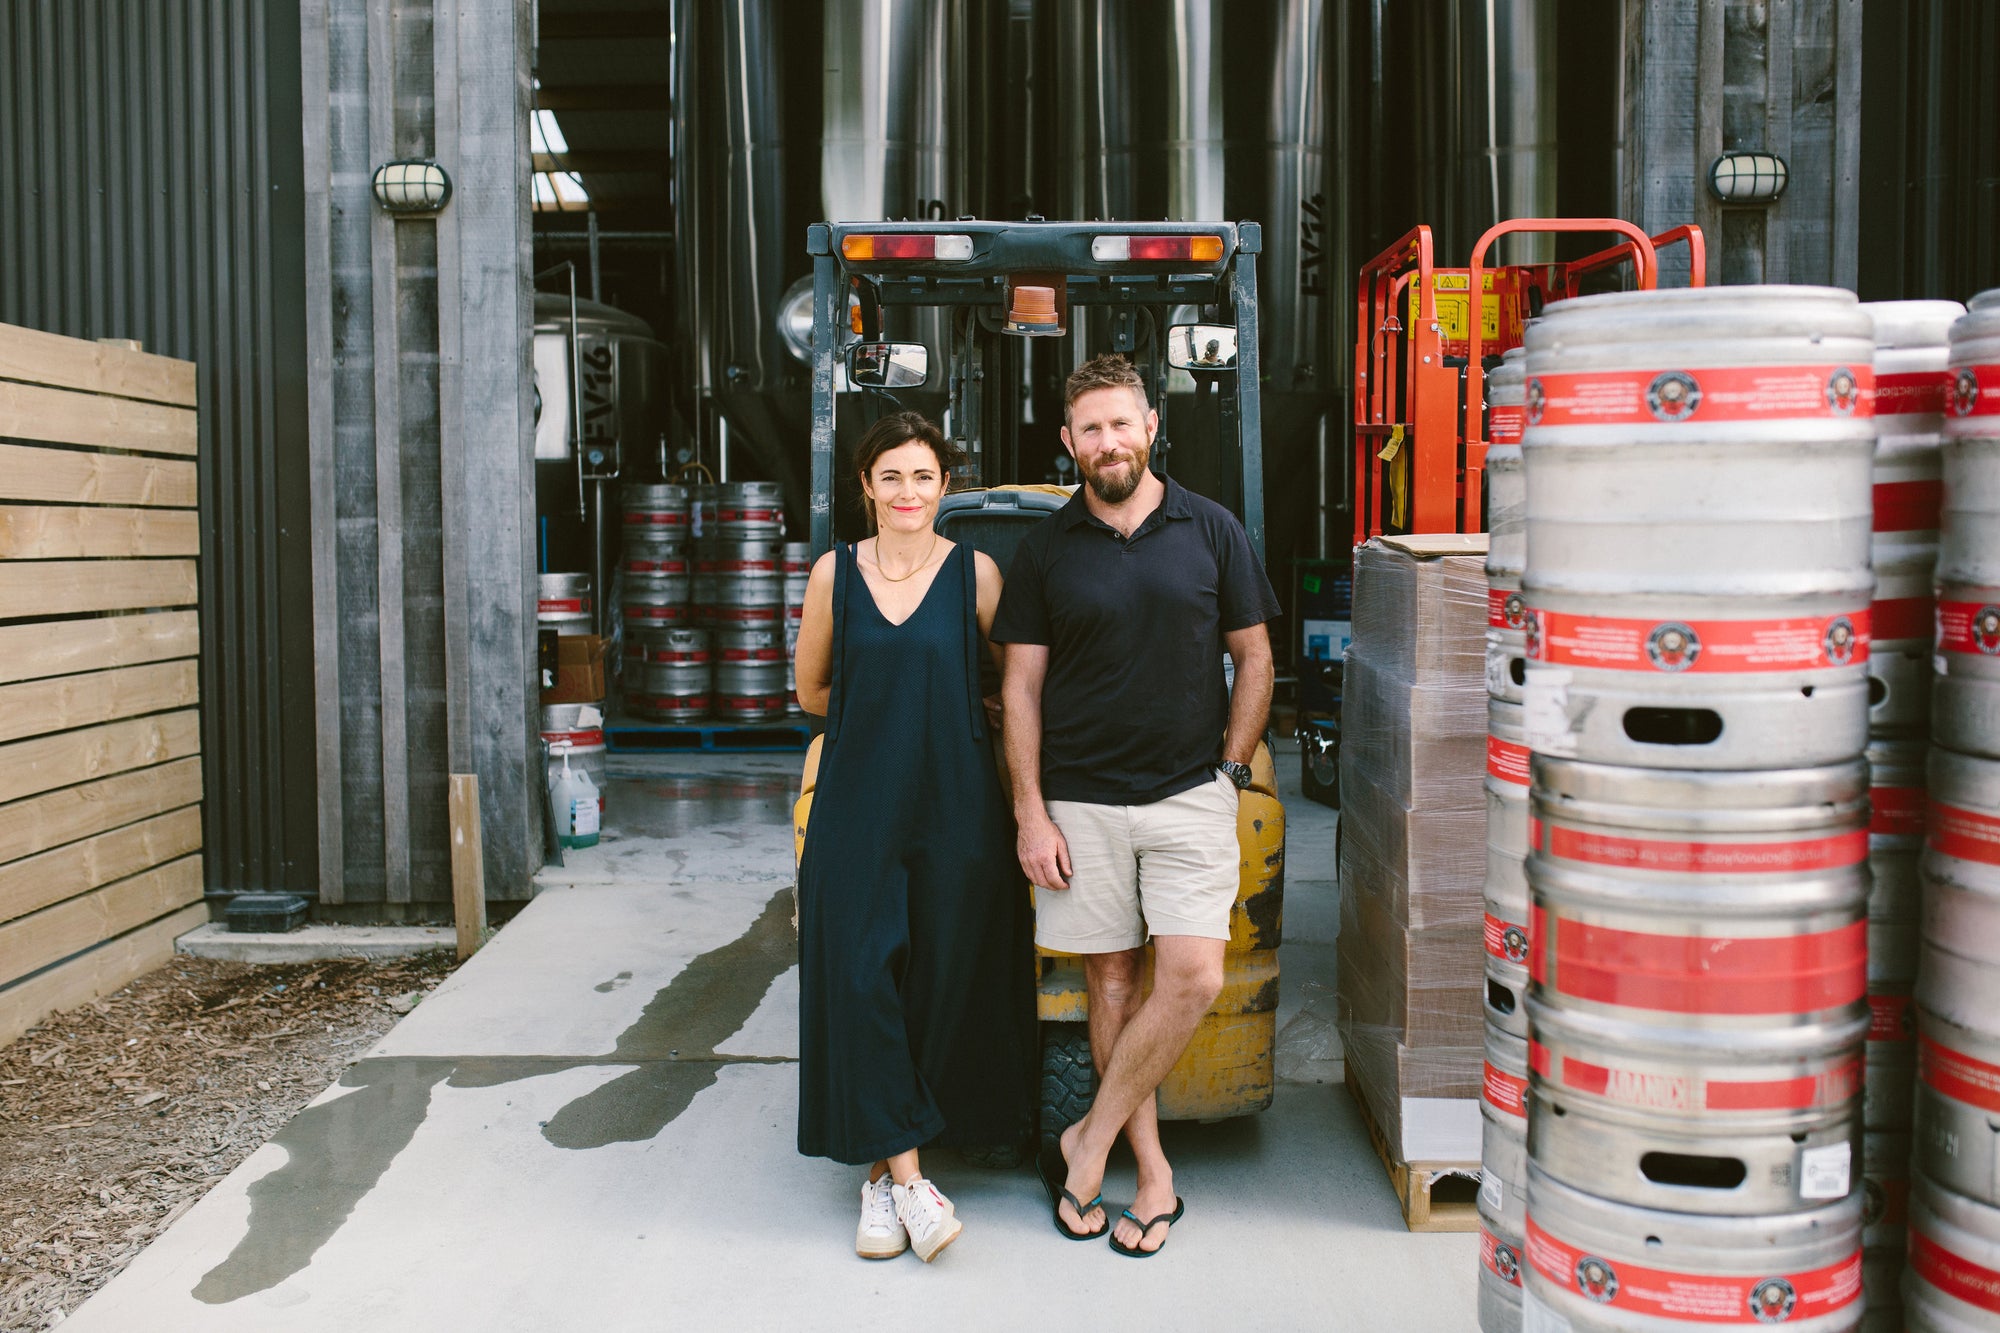 INTERVIEW WITH KIRSTY MCKAY, SAWMILL BREWERY